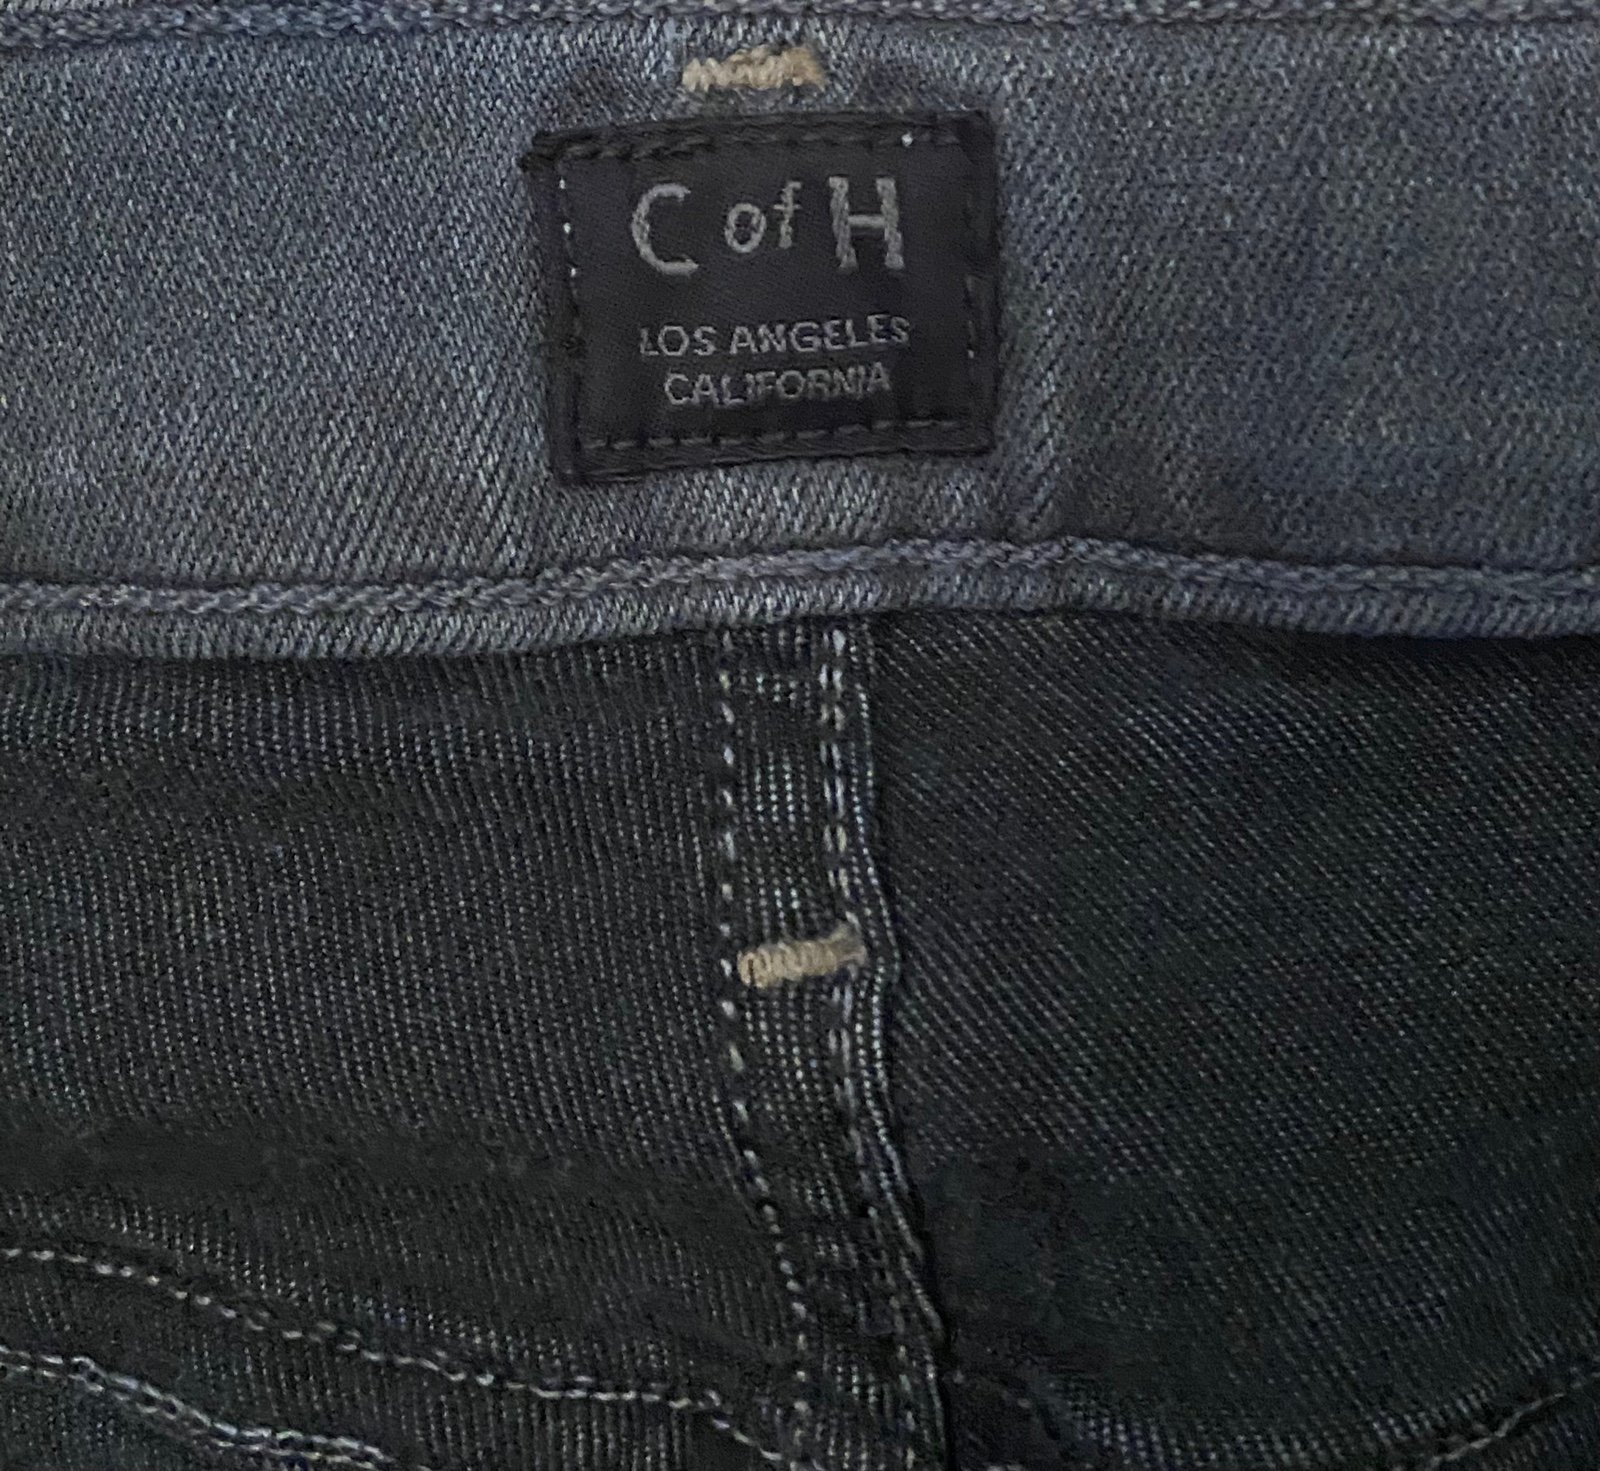 reasonable price Citizens of Himanity CoH Rocket Crop Denim Gray Jeans High Rise Womens size 26 KEG90rqUb hot sale